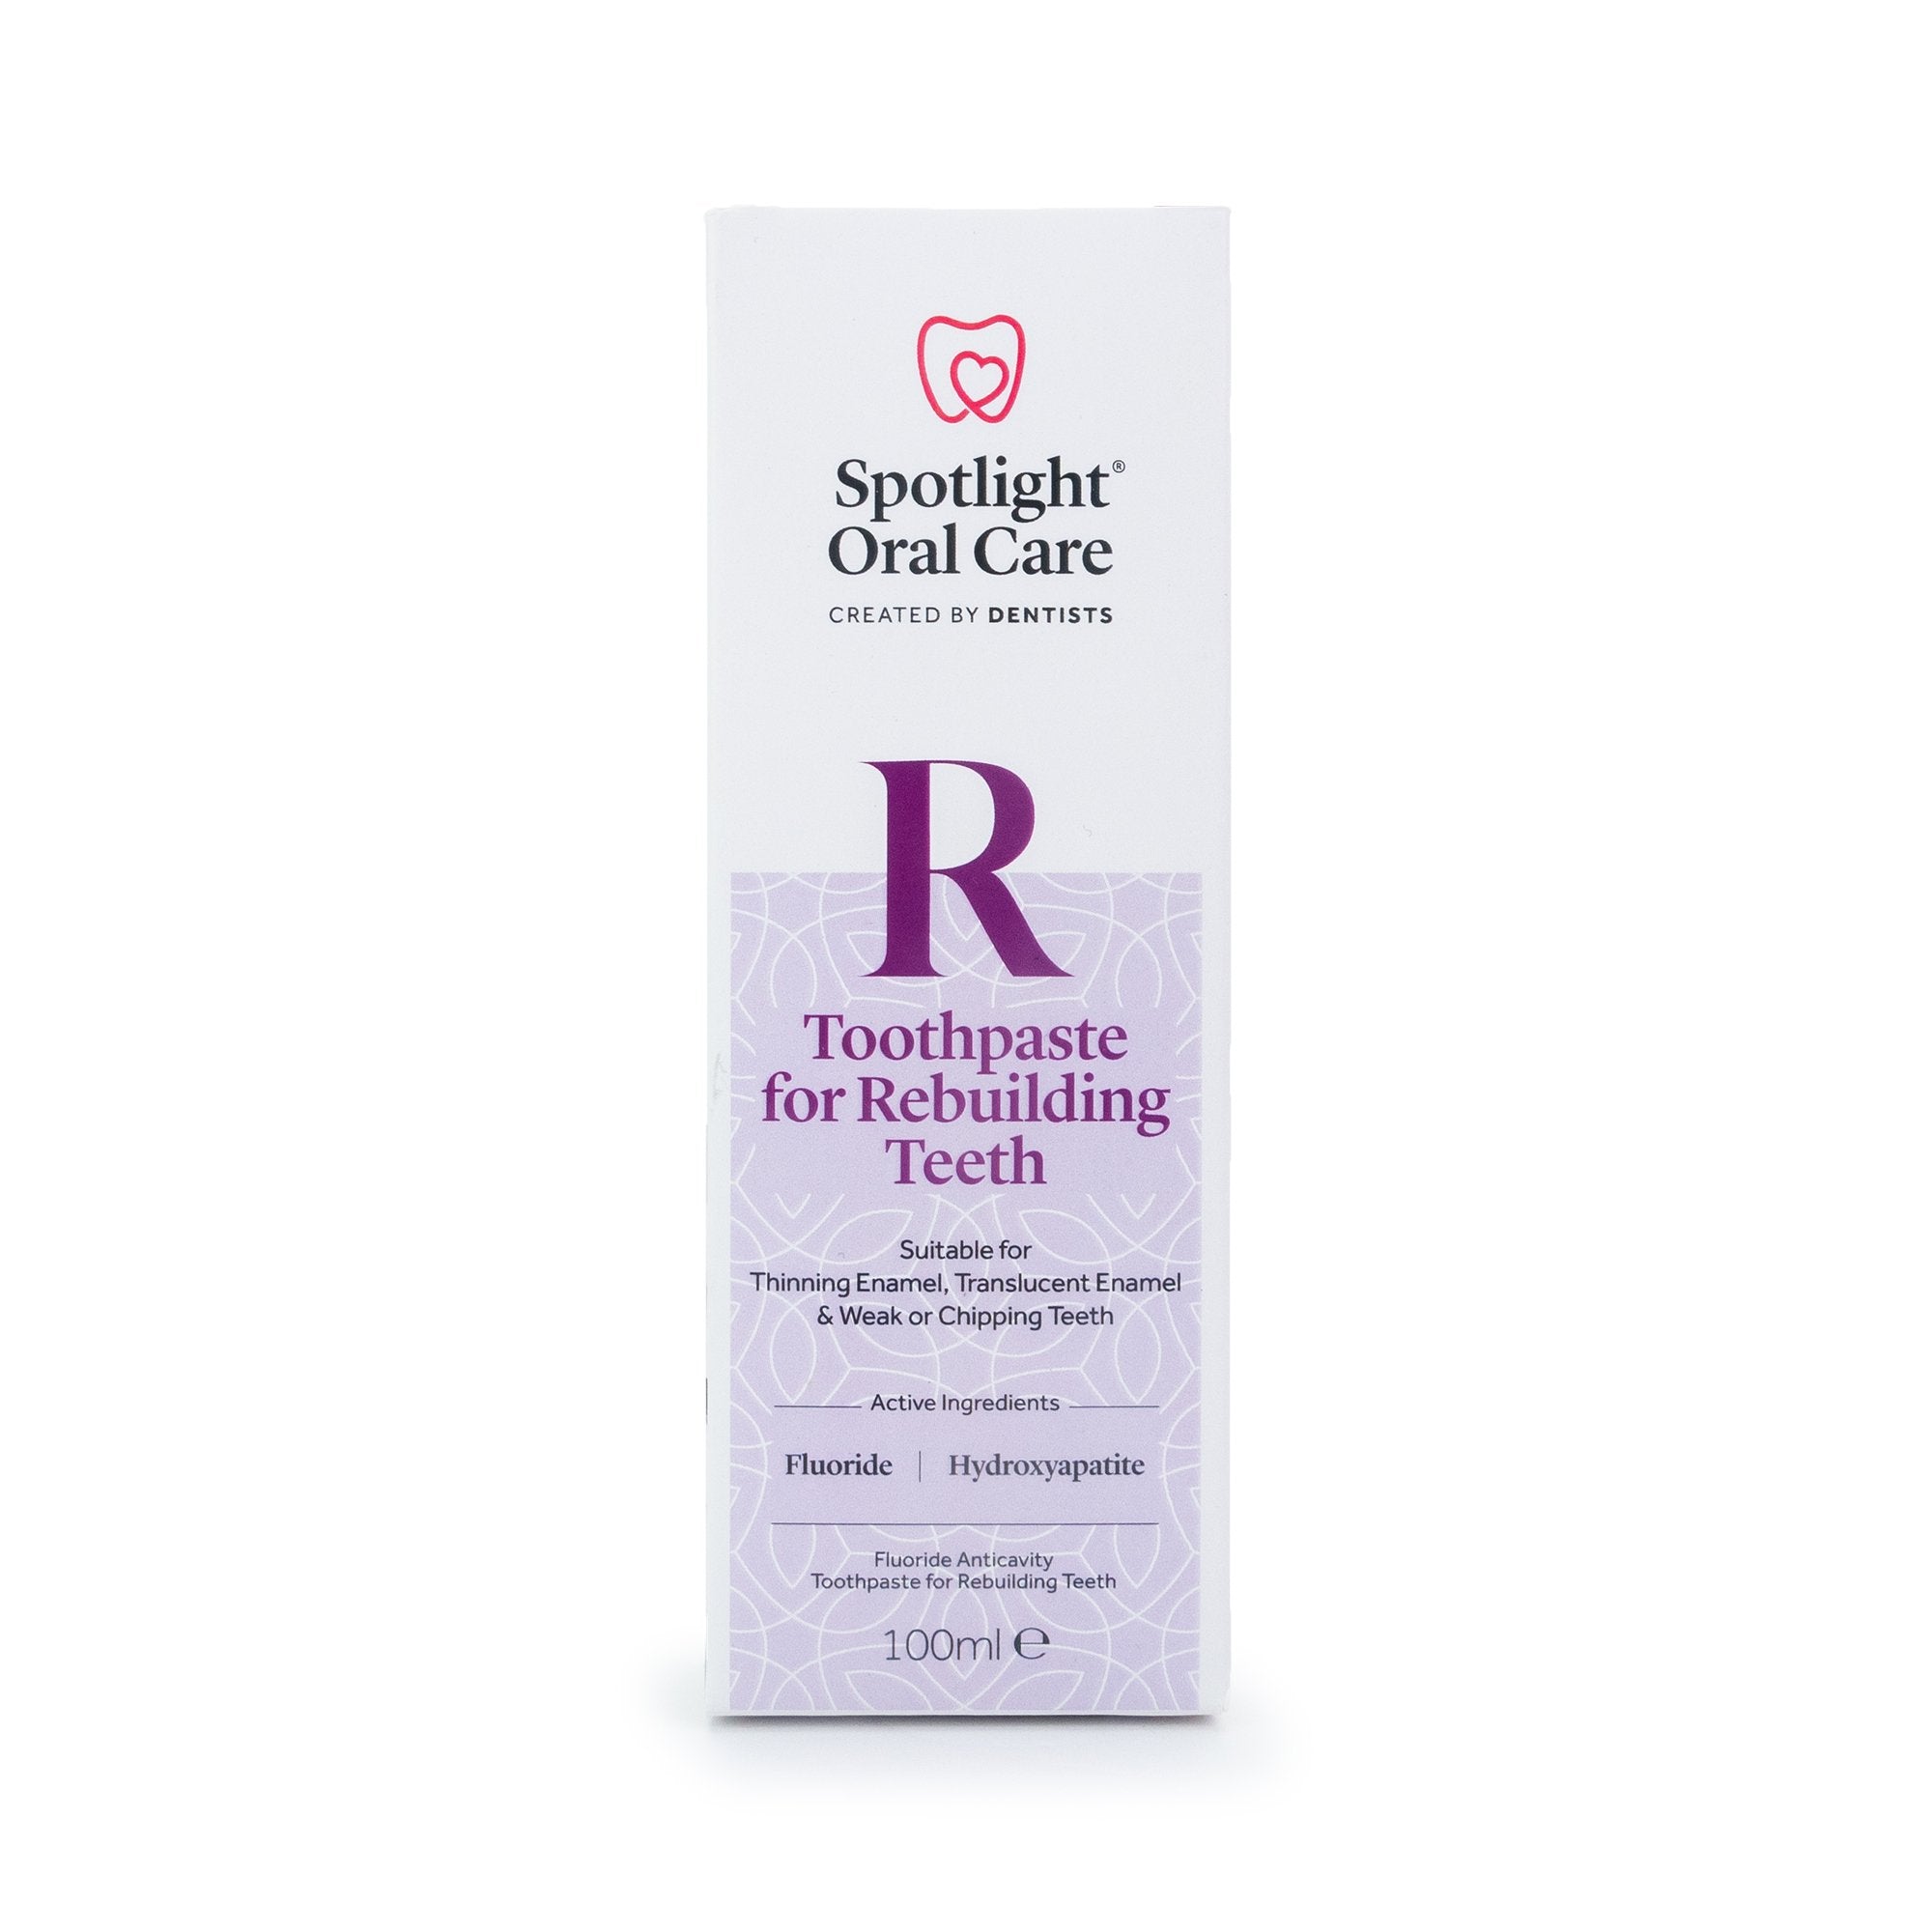 Toothpaste for Rebuilding Teeth (6587414806697)